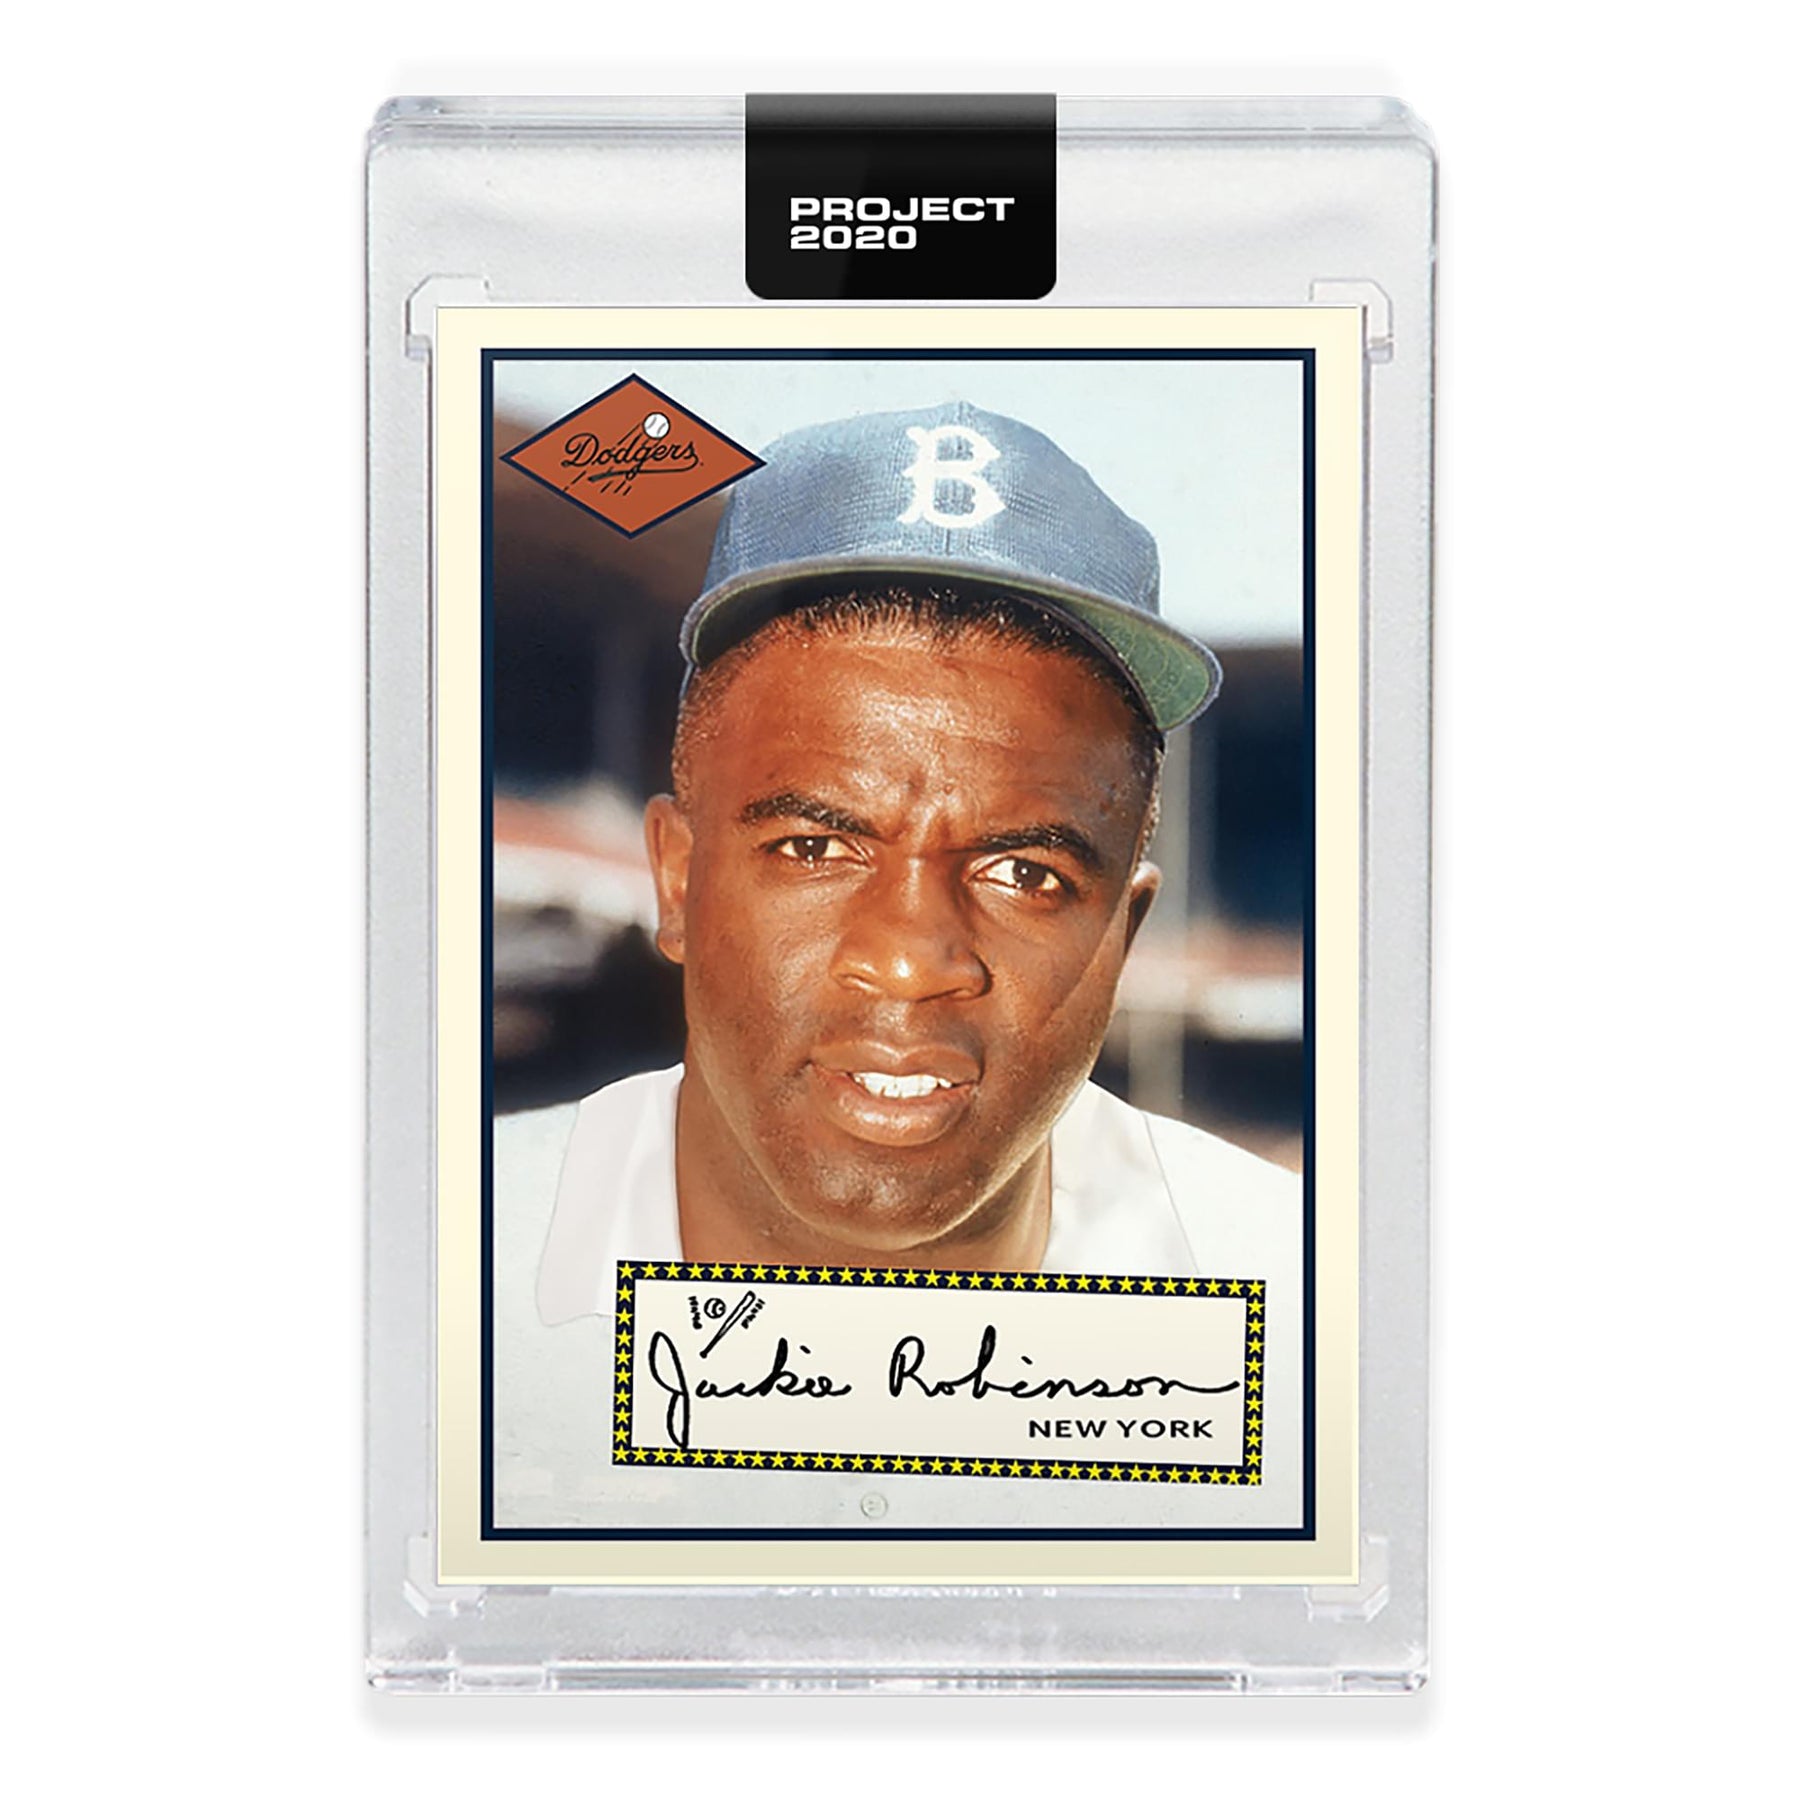 MLB Topps PROJECT 2020 Card 194 | 1952 Jackie Robinson by Oldmanalan